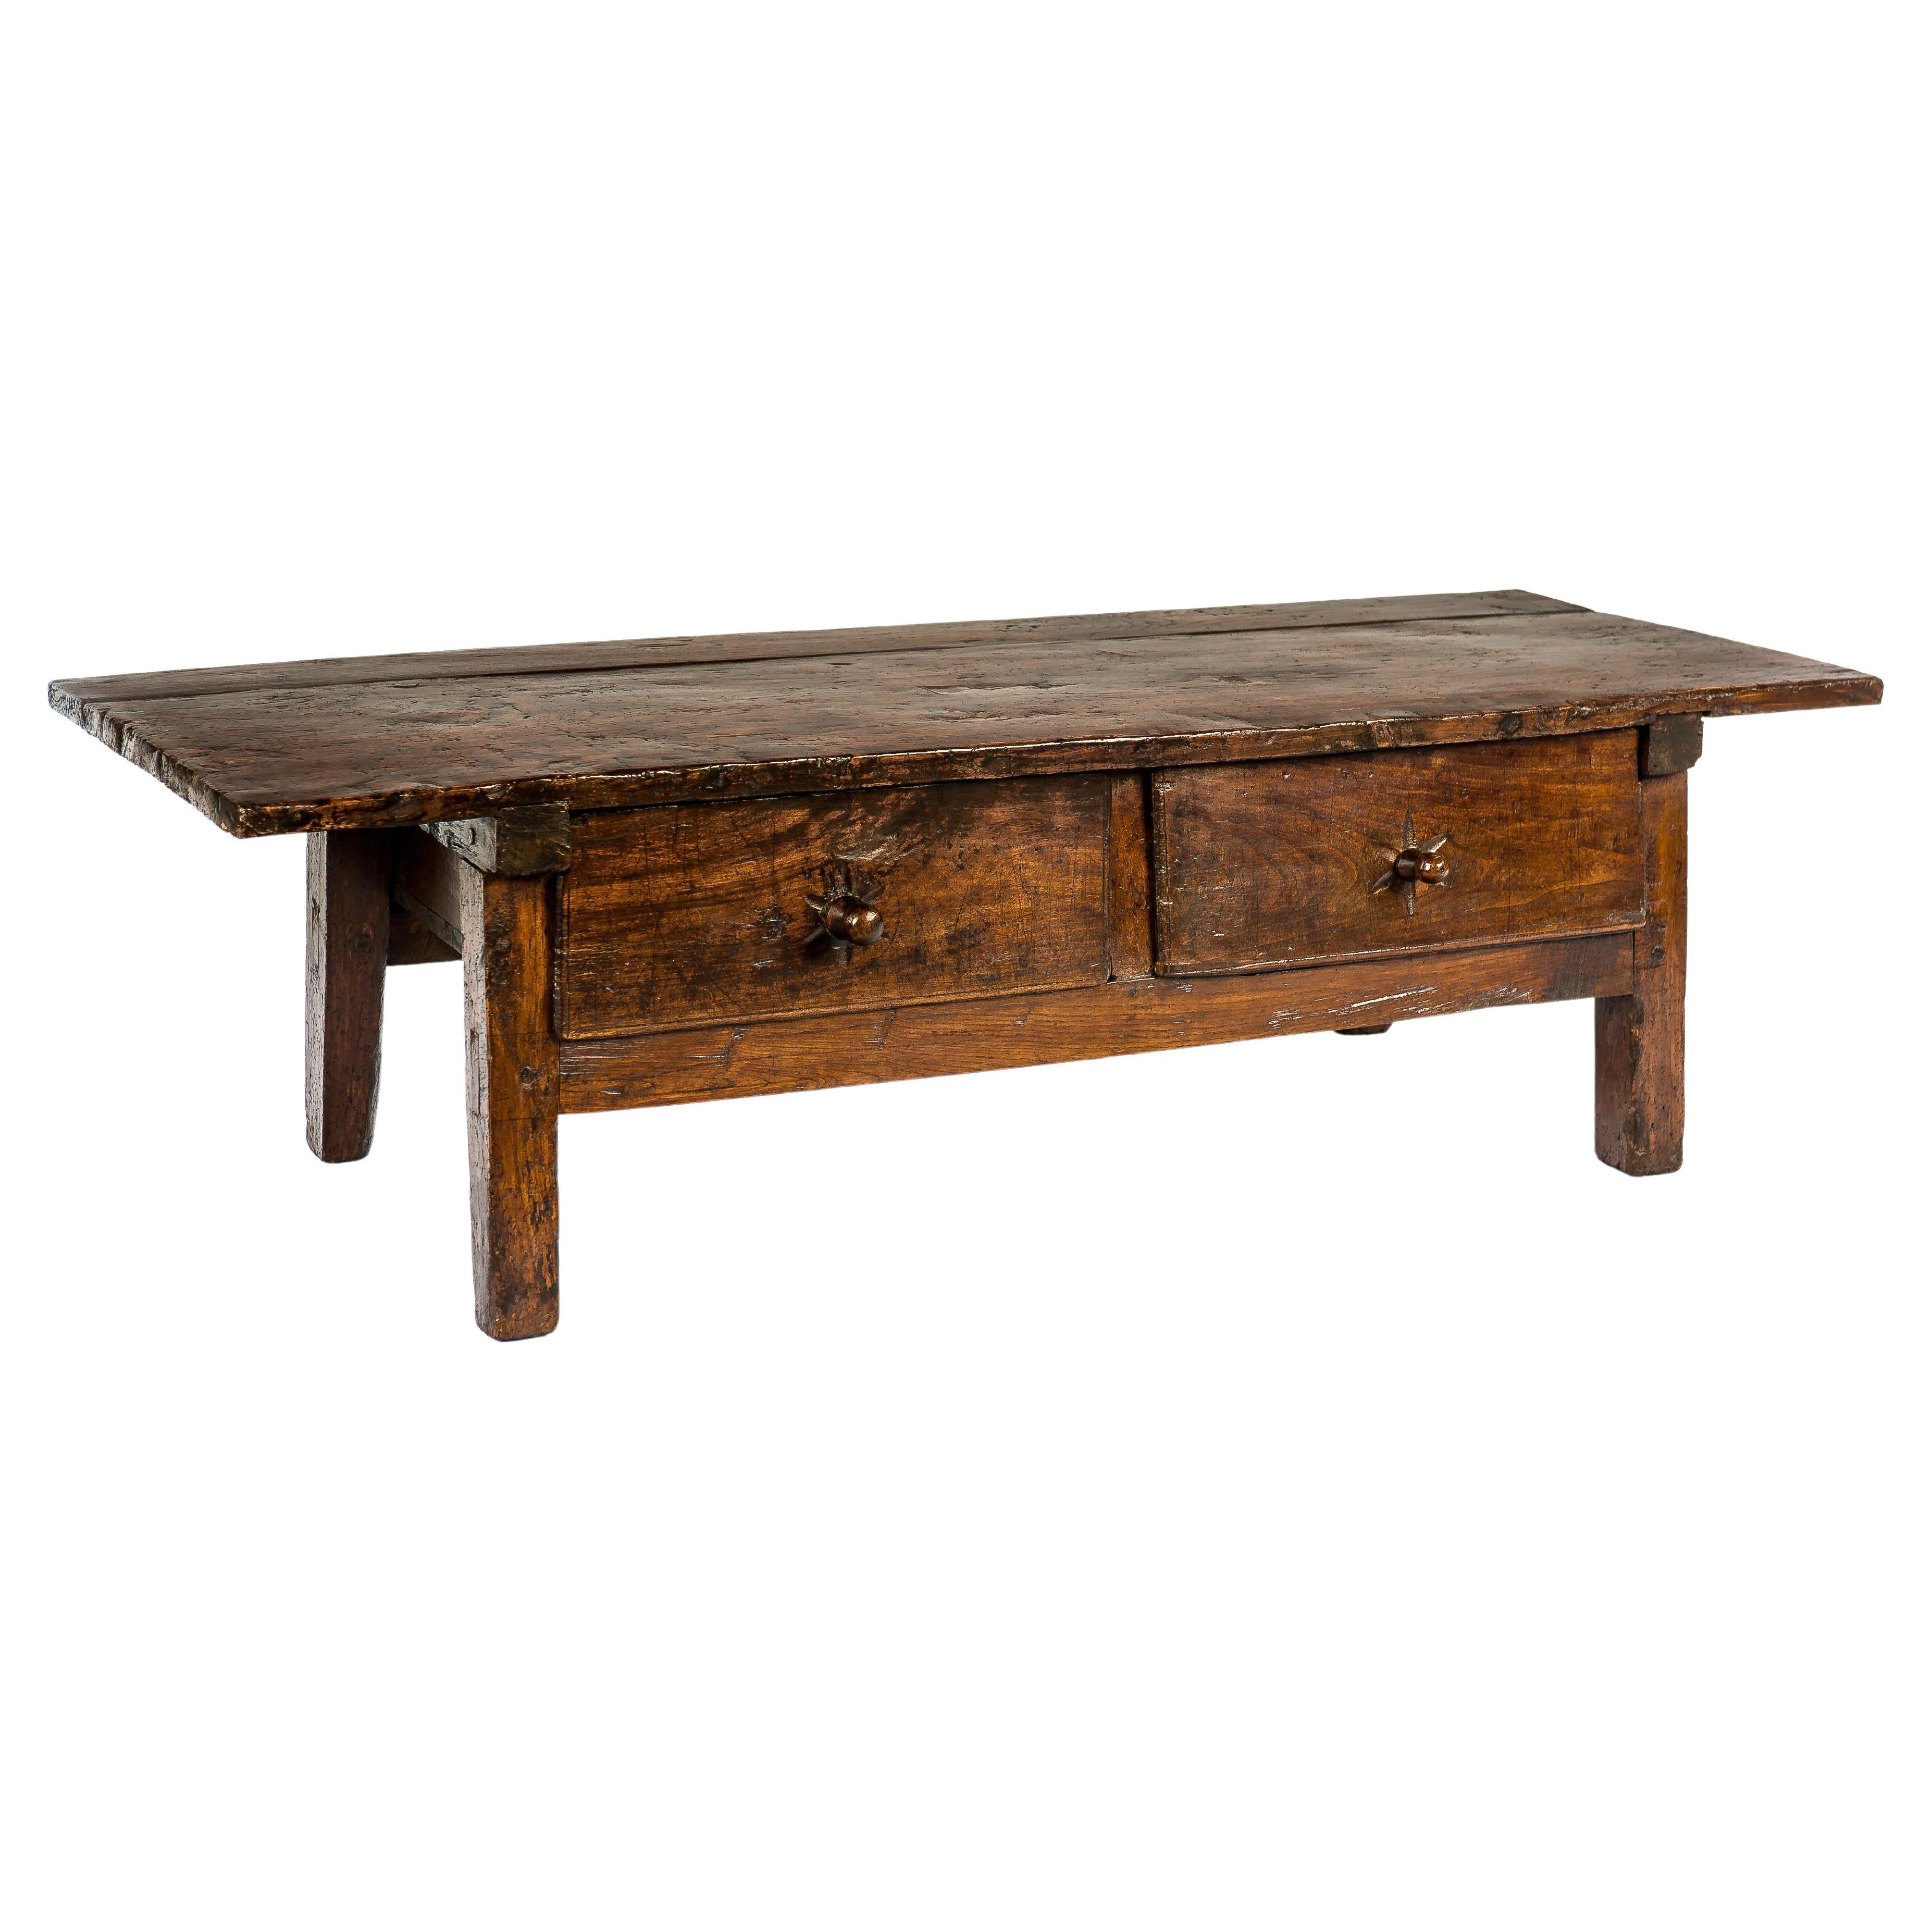 Antique 18th-Century Rustic Spanish Warm Brown Chestnut Coffee Table